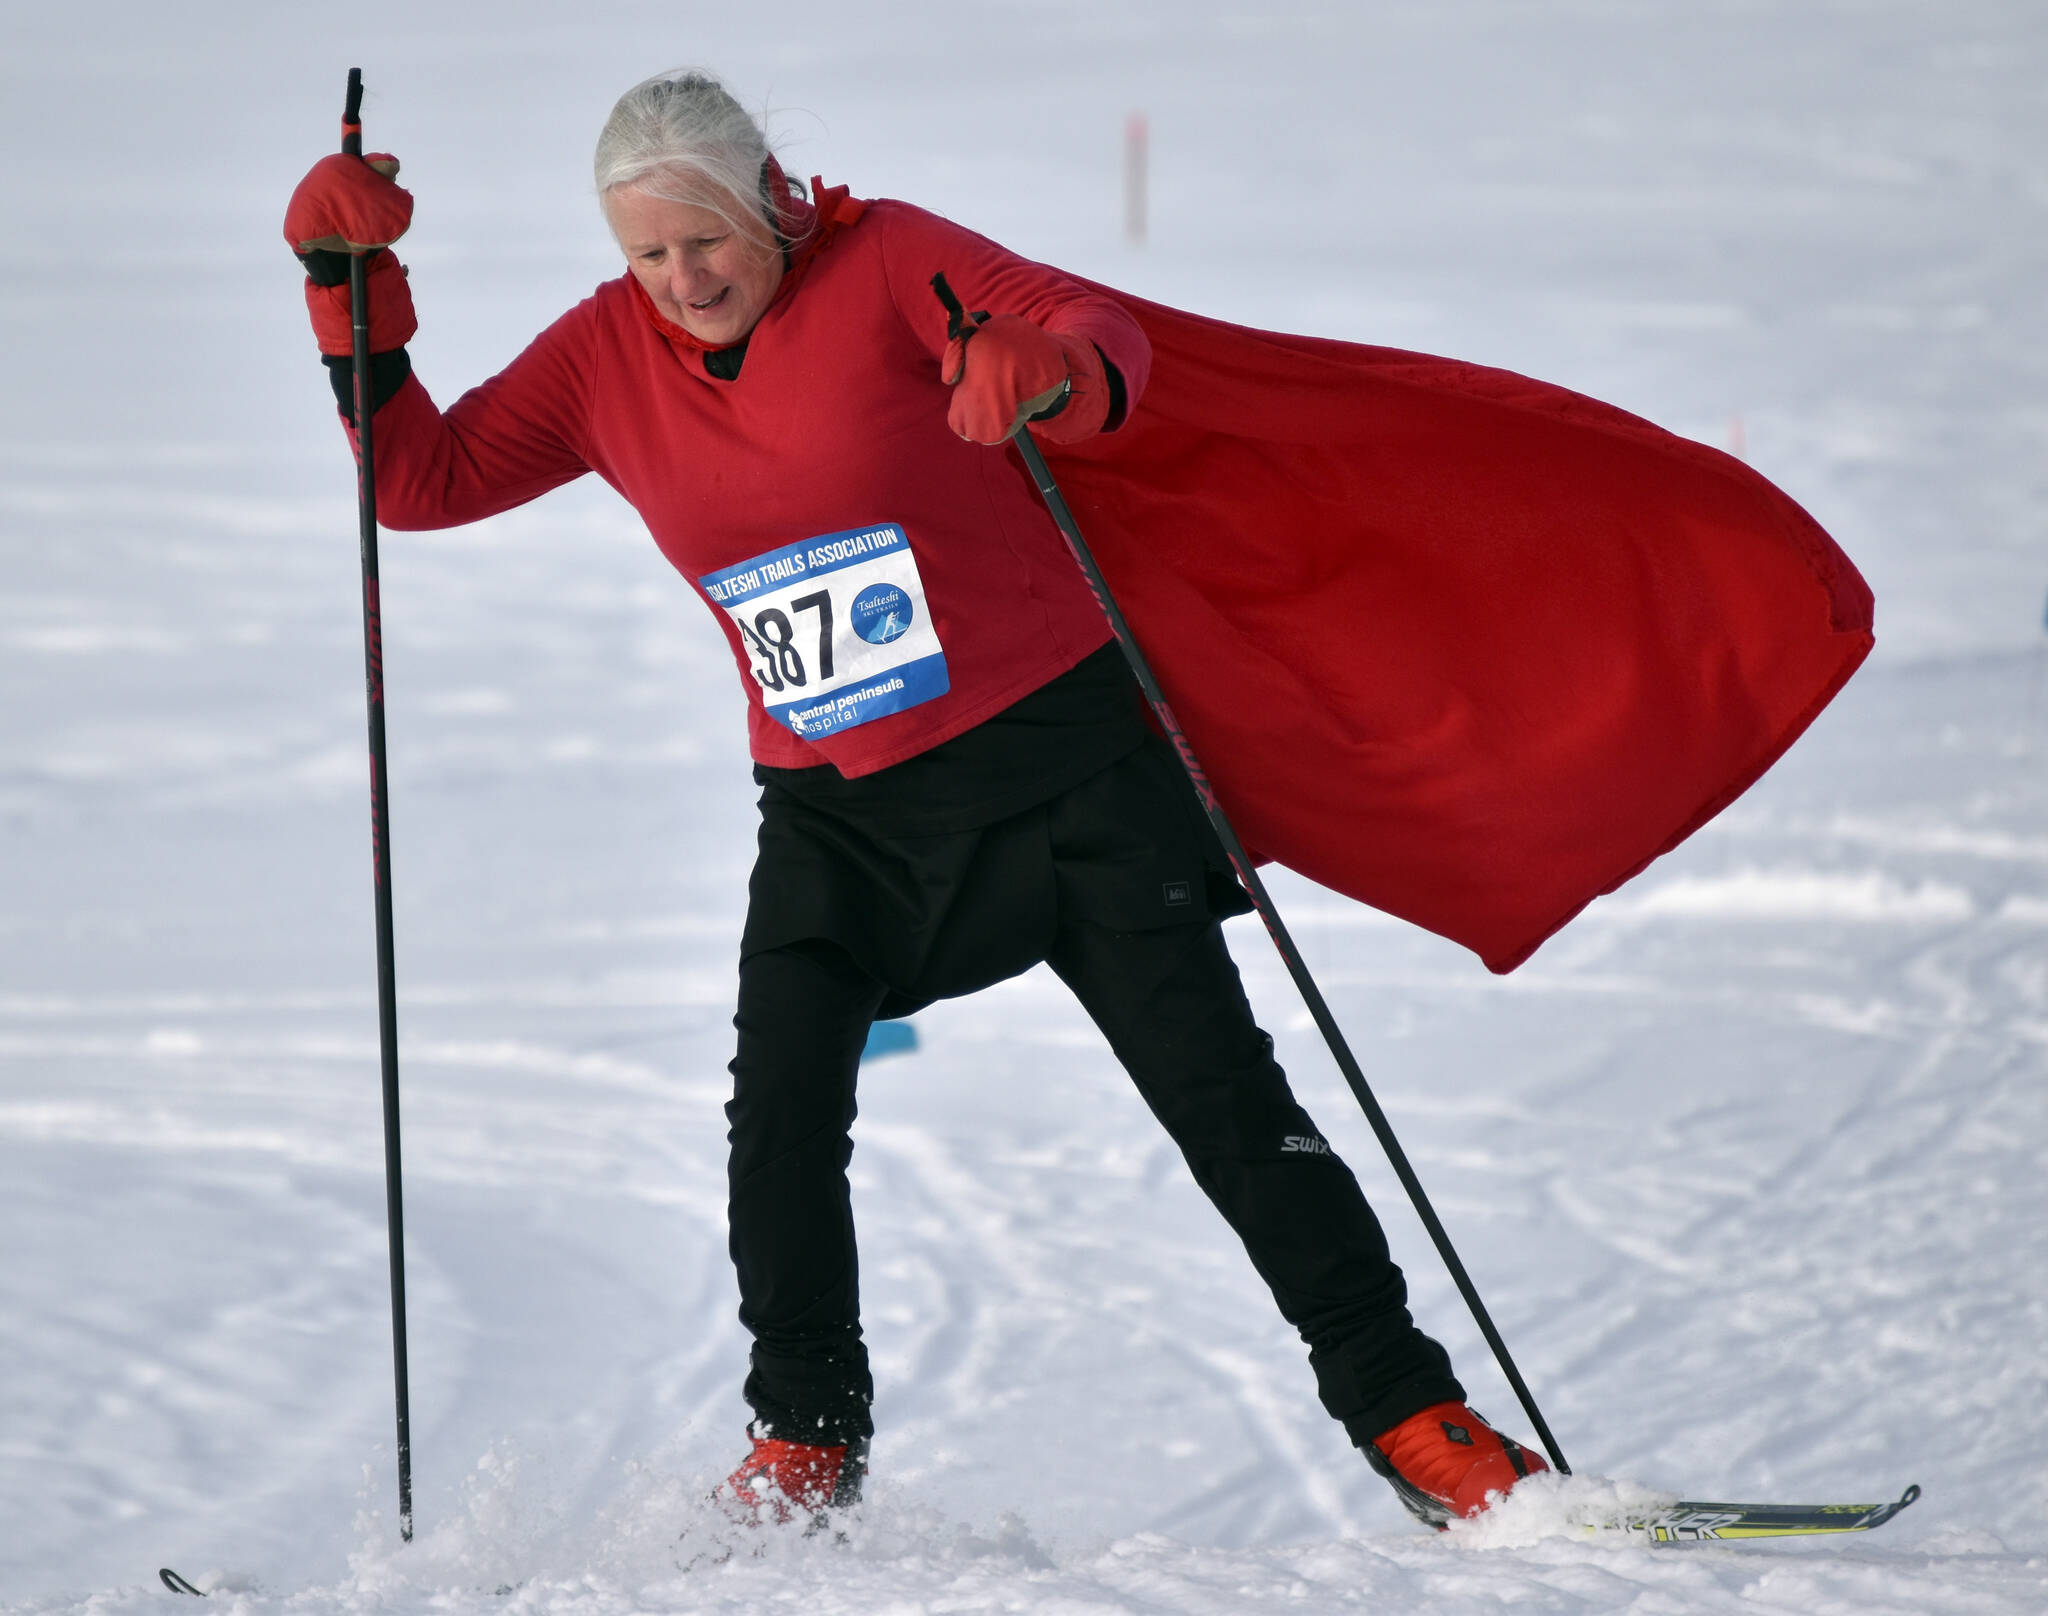 Leslie Boyd, dressed as Little Red Riding Hood, climbs a hill at the 19th annual Ski For Women on Sunday at Tsalteshi Trails just outside of Soldotna. Boyd, with Gigi Banas as Grandma, Sue Seggerman as the Woodcutter and Sara Mahood as the Wolf, were part of the winning costume of “Little Red Riding Hood and the Big Bad Wolf.”